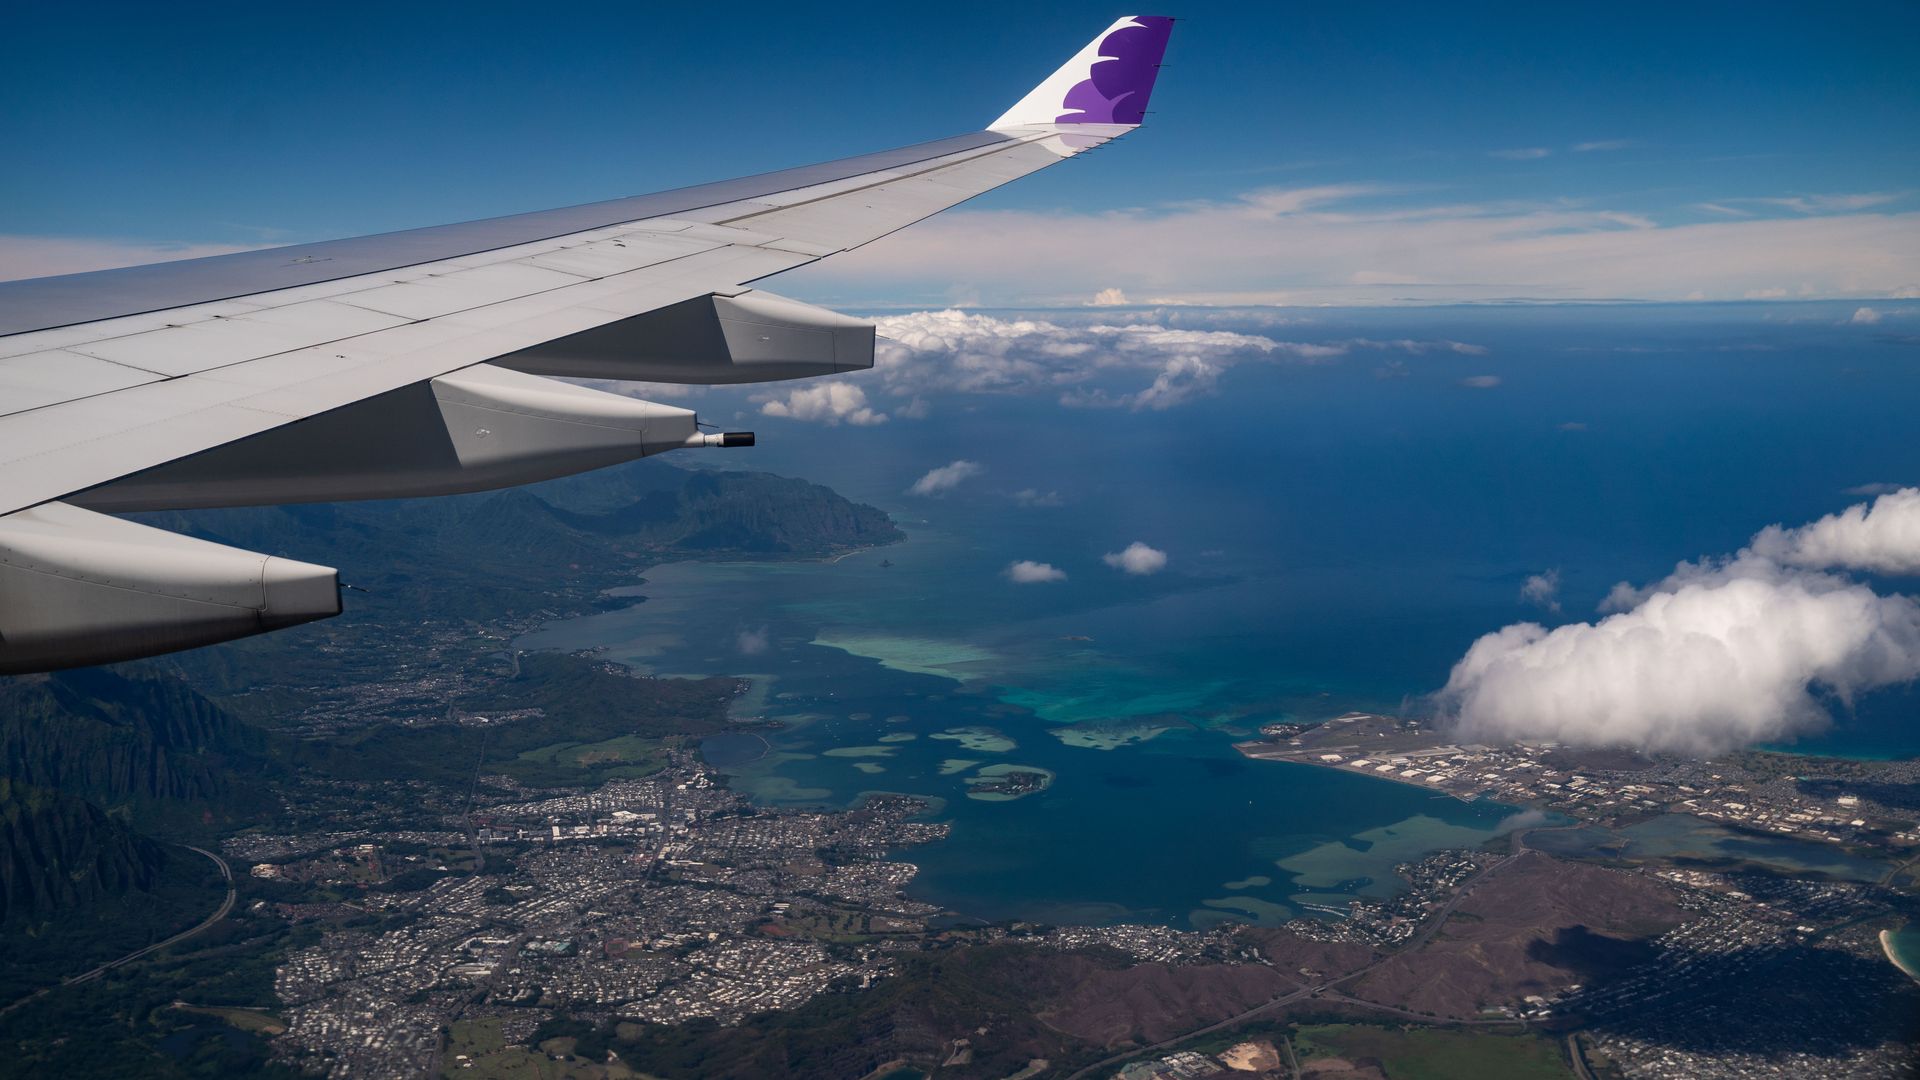 The view of the windward side of Oahu, from aboard a Hawaiian Airlines flight from Los Angeles International Airport to Honolulu International Airport on Thursday, Oct. 15, 2020 above Honolulu, HI. 